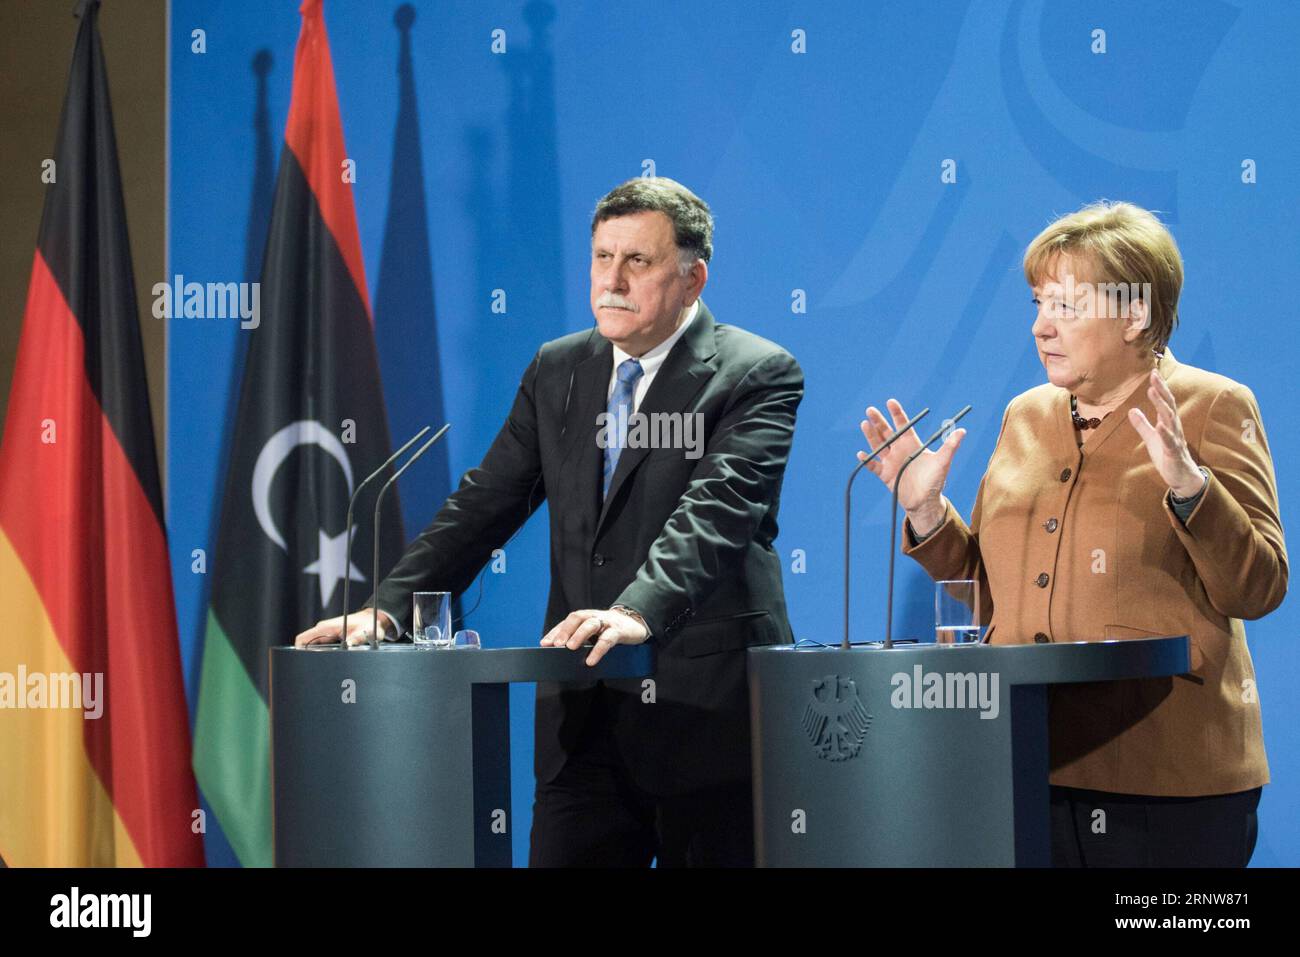 (171207) -- BERLIN, Dec. 7, 2017 -- German Chancellor Angela Merkel (R) addresses a press conference with visiting Libyan UN-backed Prime Minister Fayez al-Sarraj in Berlin, Germany, on Dec. 7, 2017. Merkel, after talks with Fayez al-Sarraj on Thursday, urged the Libyan authorities to improve the conditions of migrants in the North African country and pledged more support from the European Union. ) GERMANY-BERLIN-CHANCELLOR-LIBYA-UN-BACKED PM-MEETING ZhangxYuan PUBLICATIONxNOTxINxCHN Stock Photo